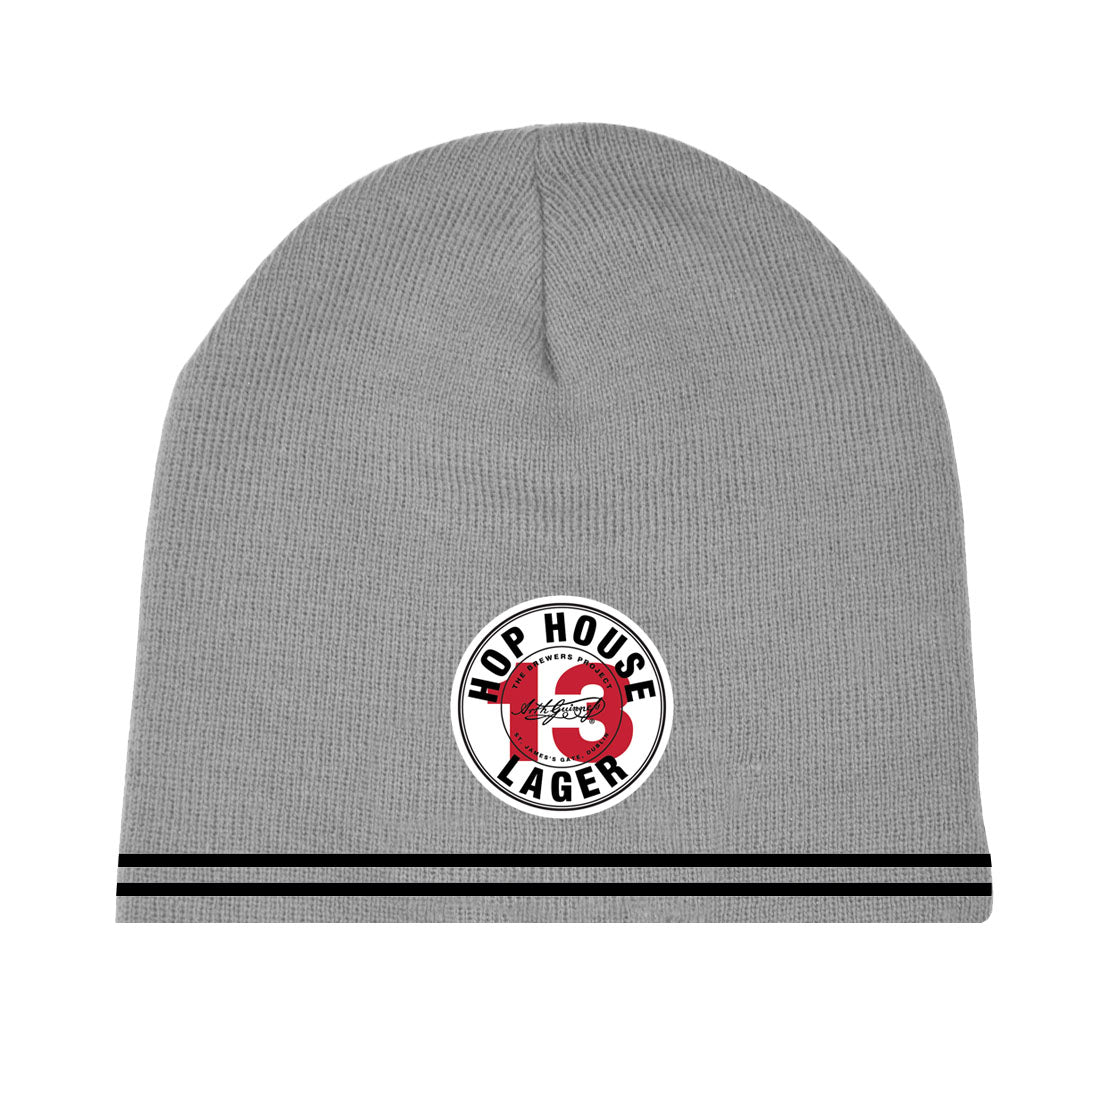 Hop House Grey Knitted Hat